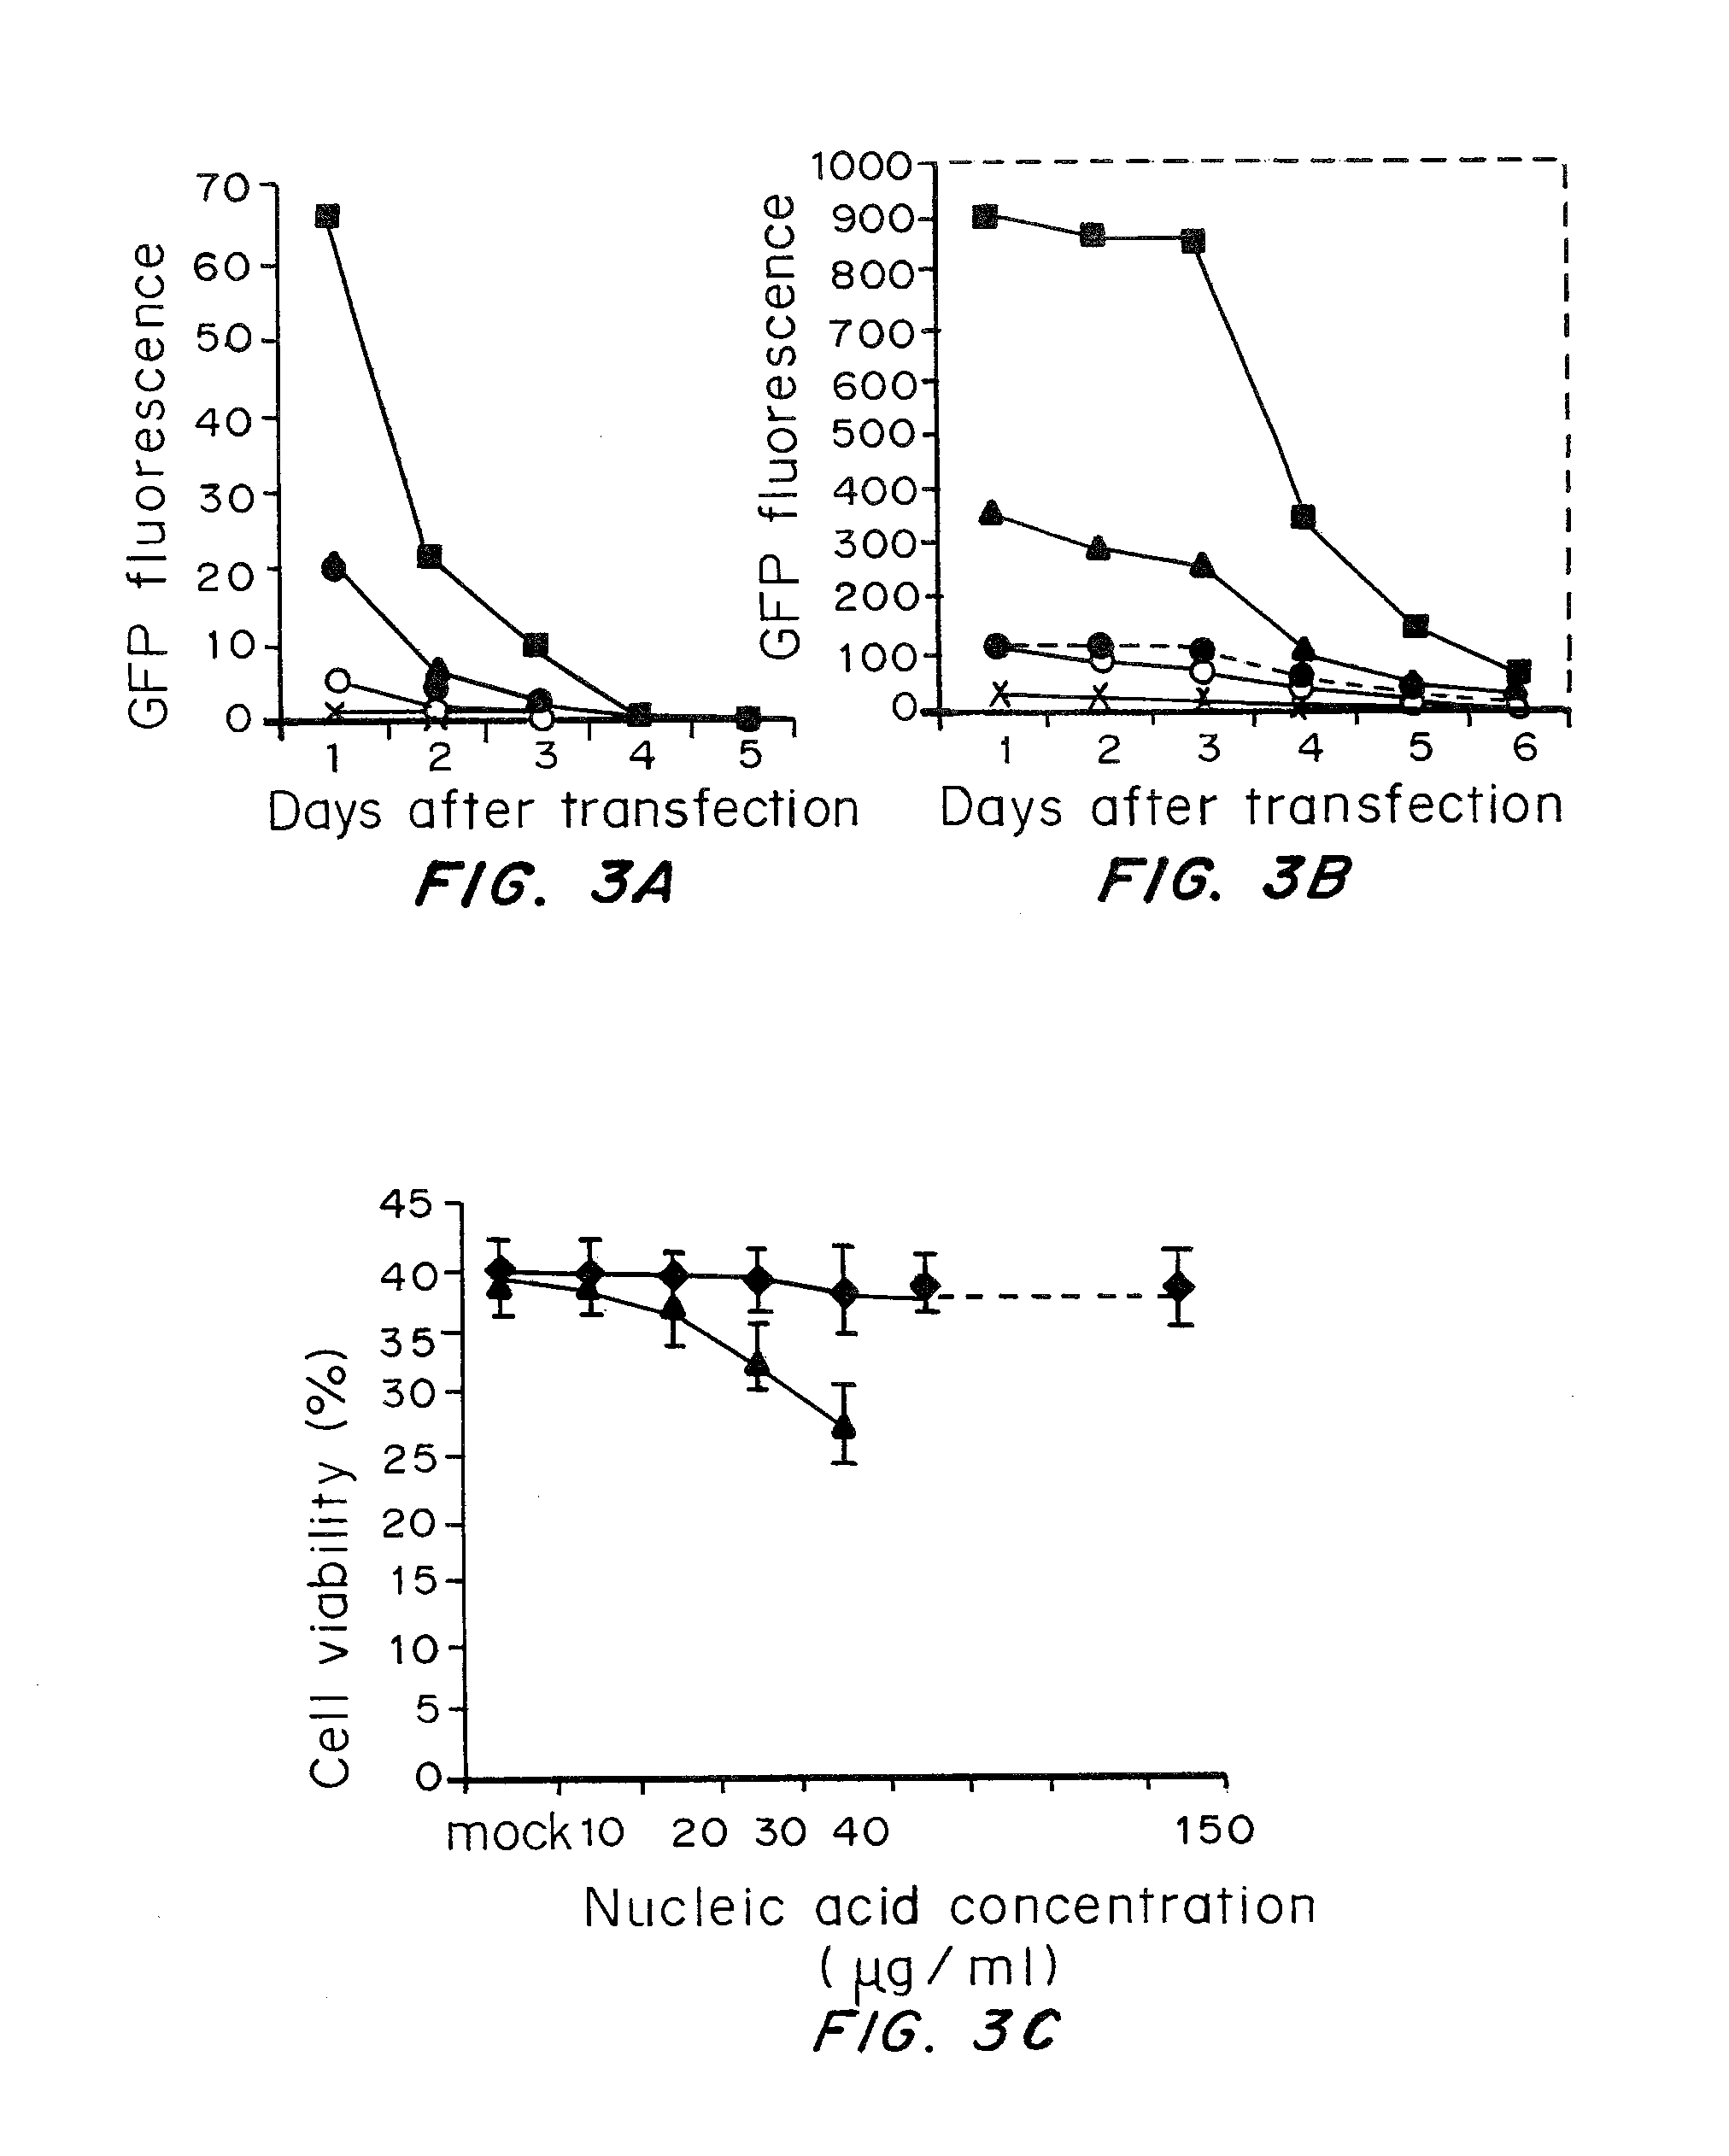 Cells prepared by transient transfection and methods of use thereof